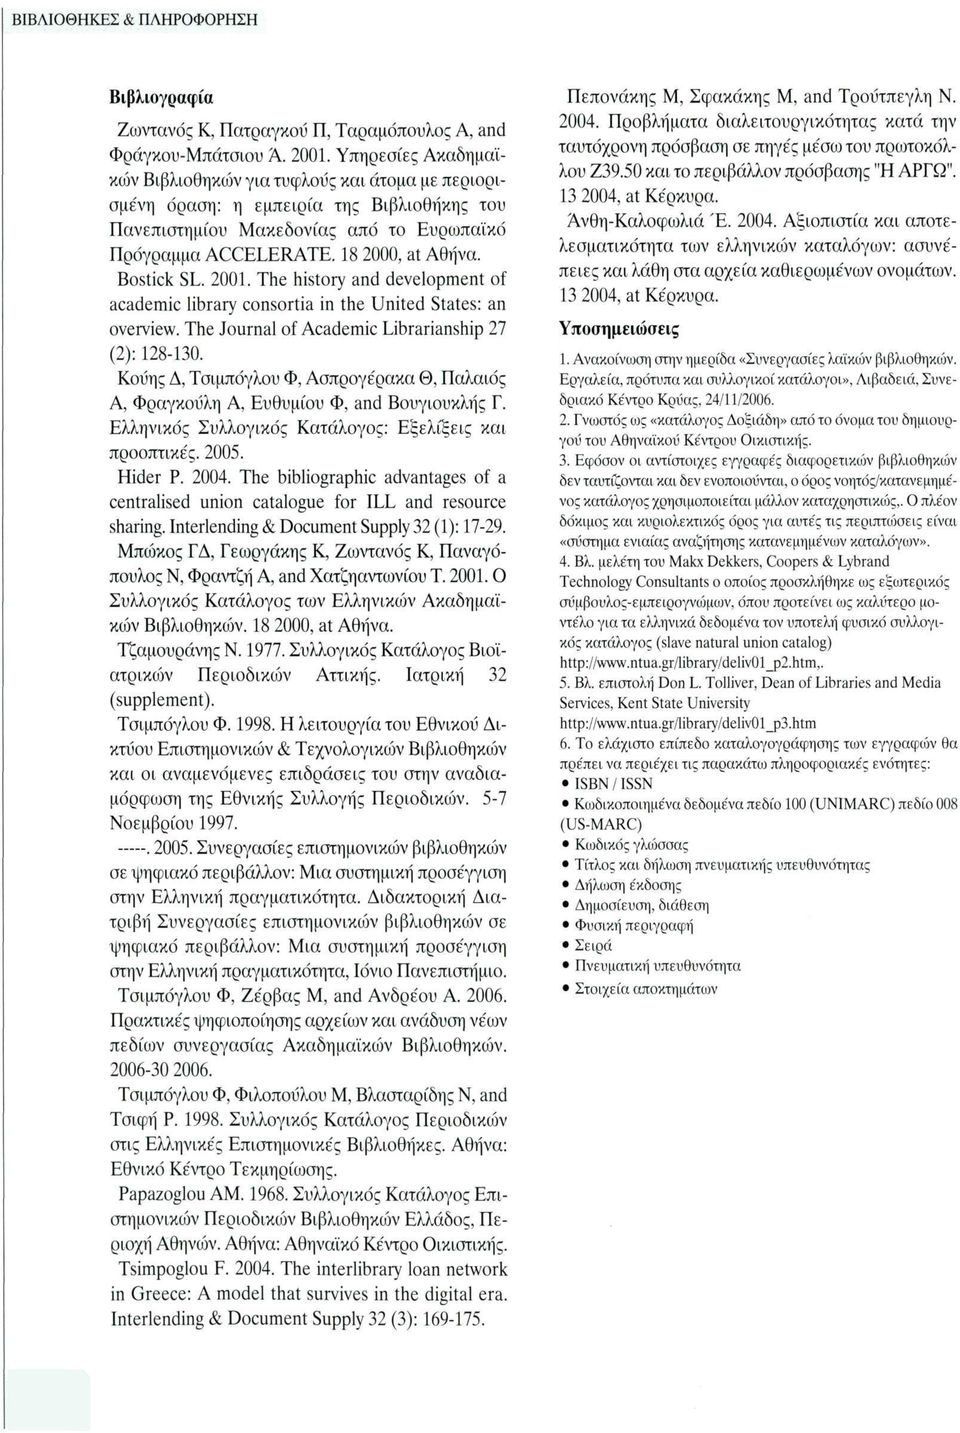 Bostick SL. 200. The history and development of academic library consortia in the United States: an overview. The Journal of Academic Librarianship 27 (2): 28-30.